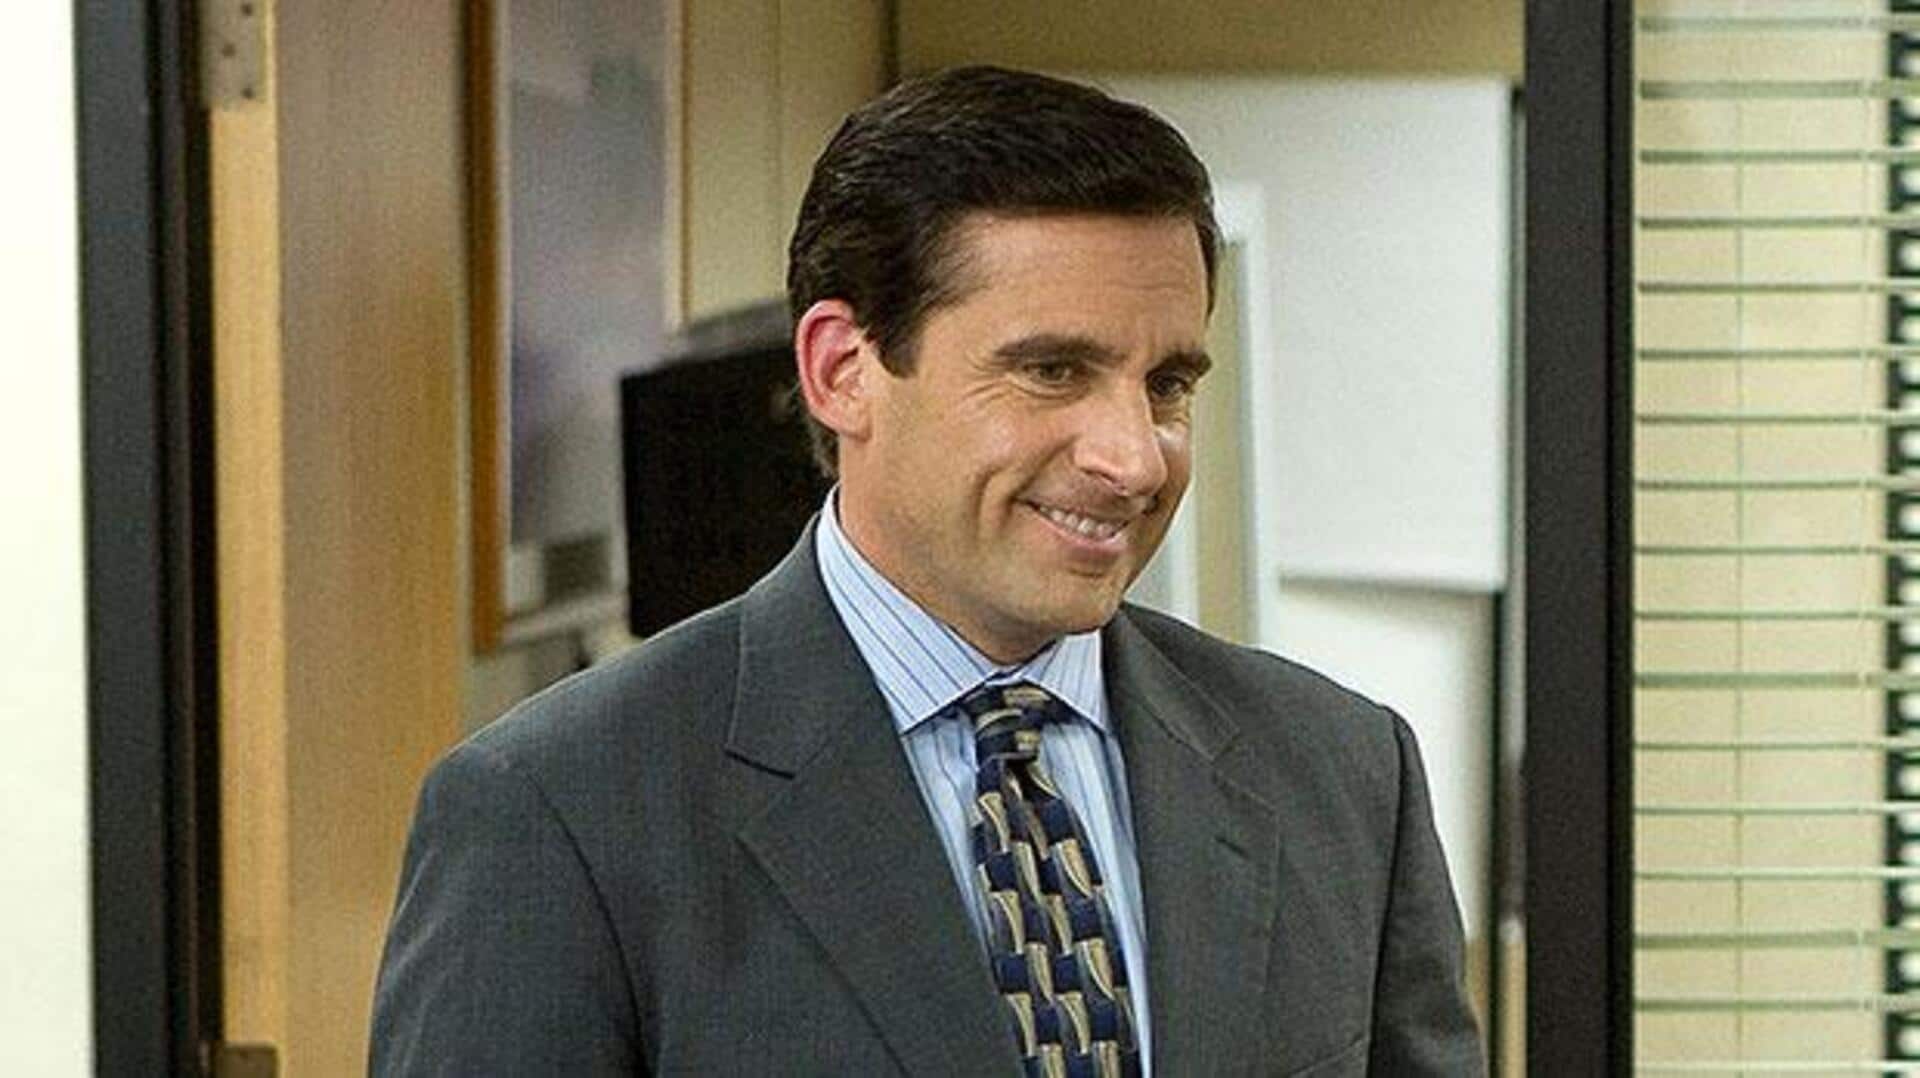 Steve Carell returning for 'The Office' reboot? He says no